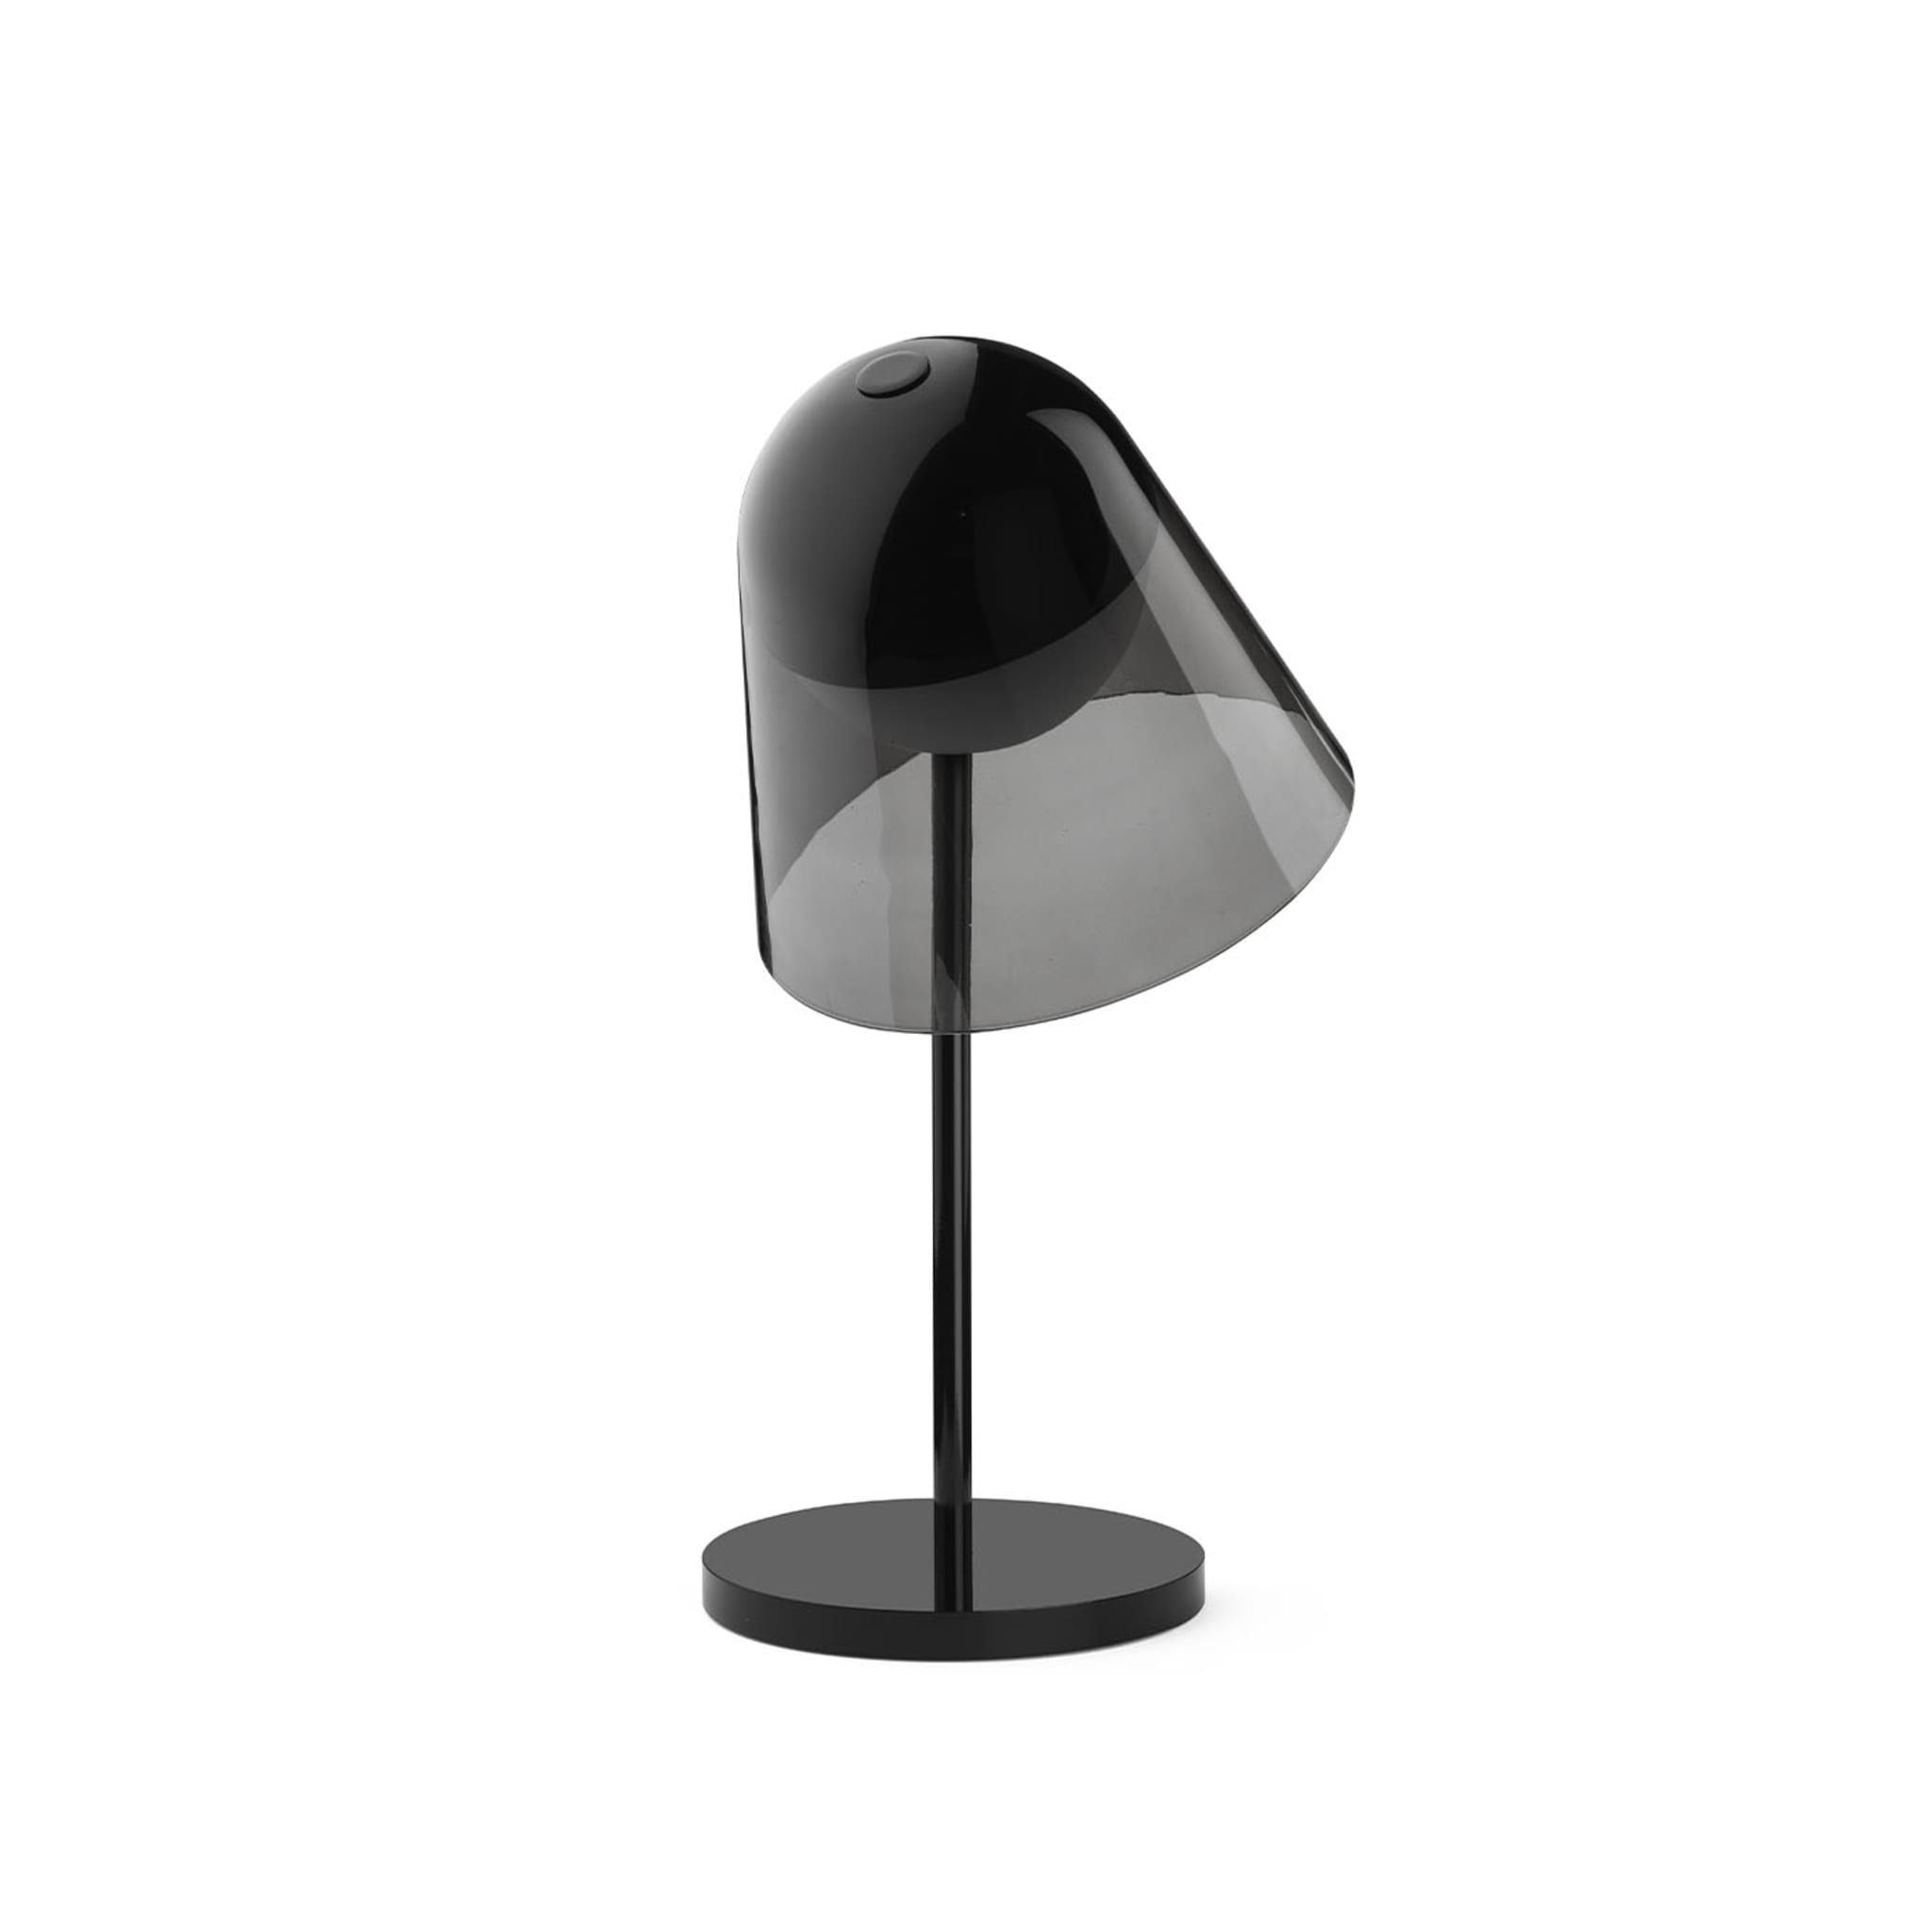 Helios Table Lamp by Branch Creative - Alternative view 2